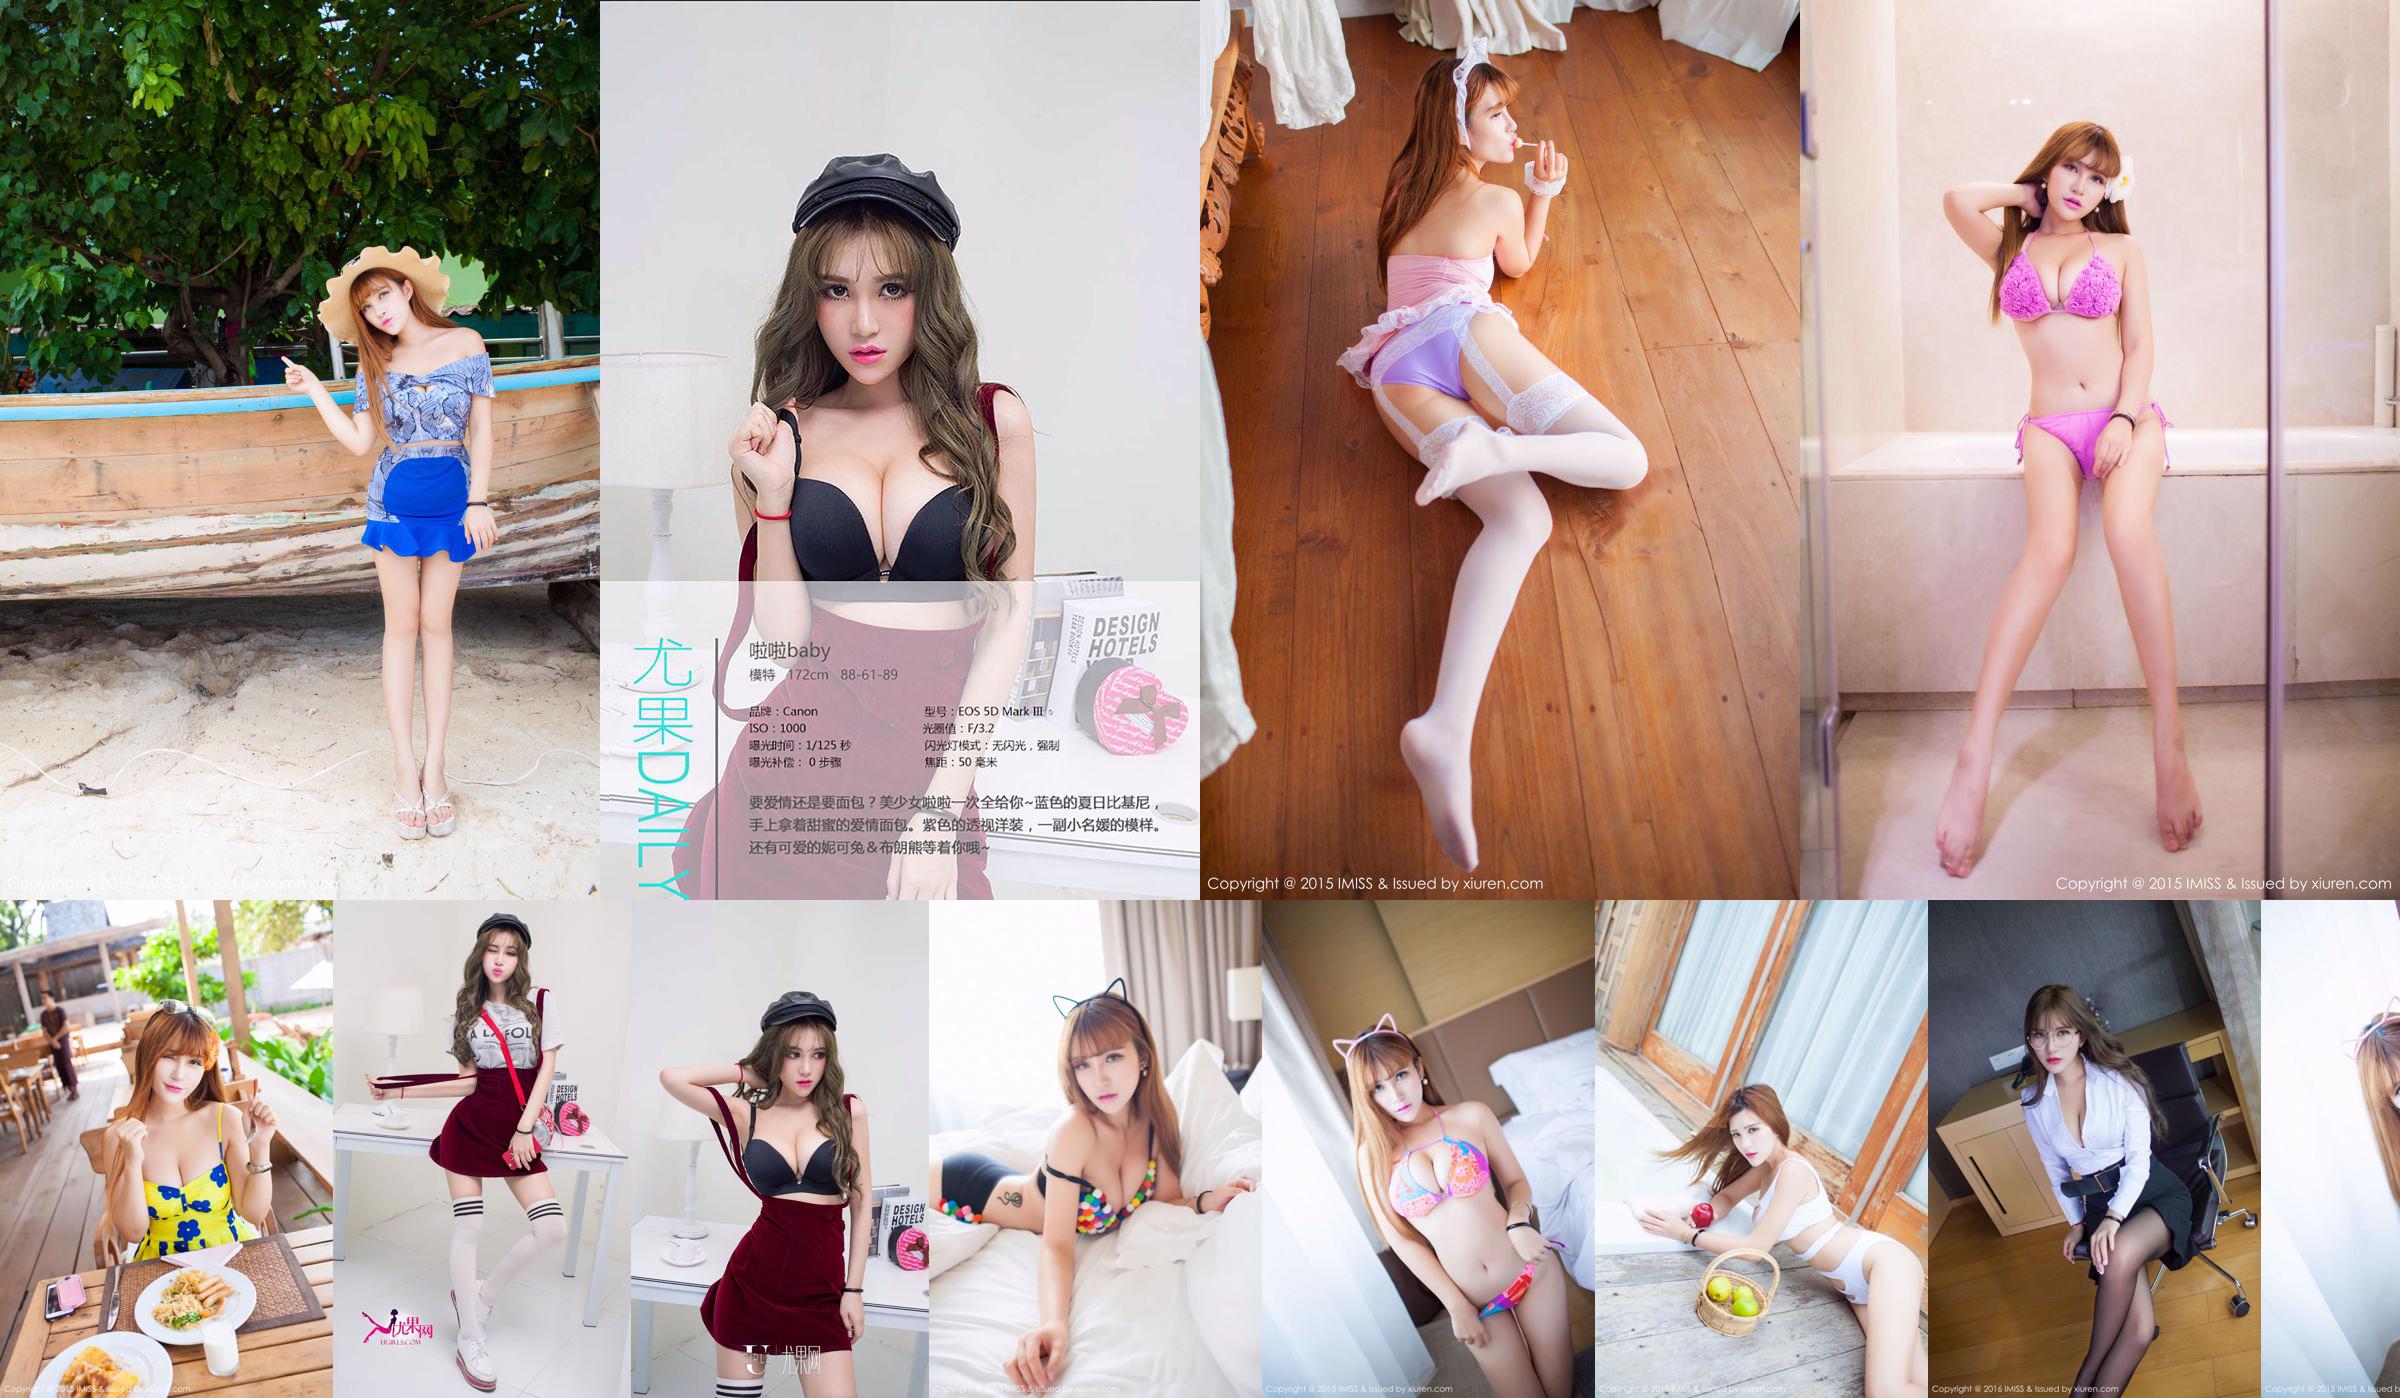 LalaBaby 啦 啦 《Femme de chambre blanche + robe xx blanche》 [Love honey company I Miss] Vol.034 No.b46812 Page 23